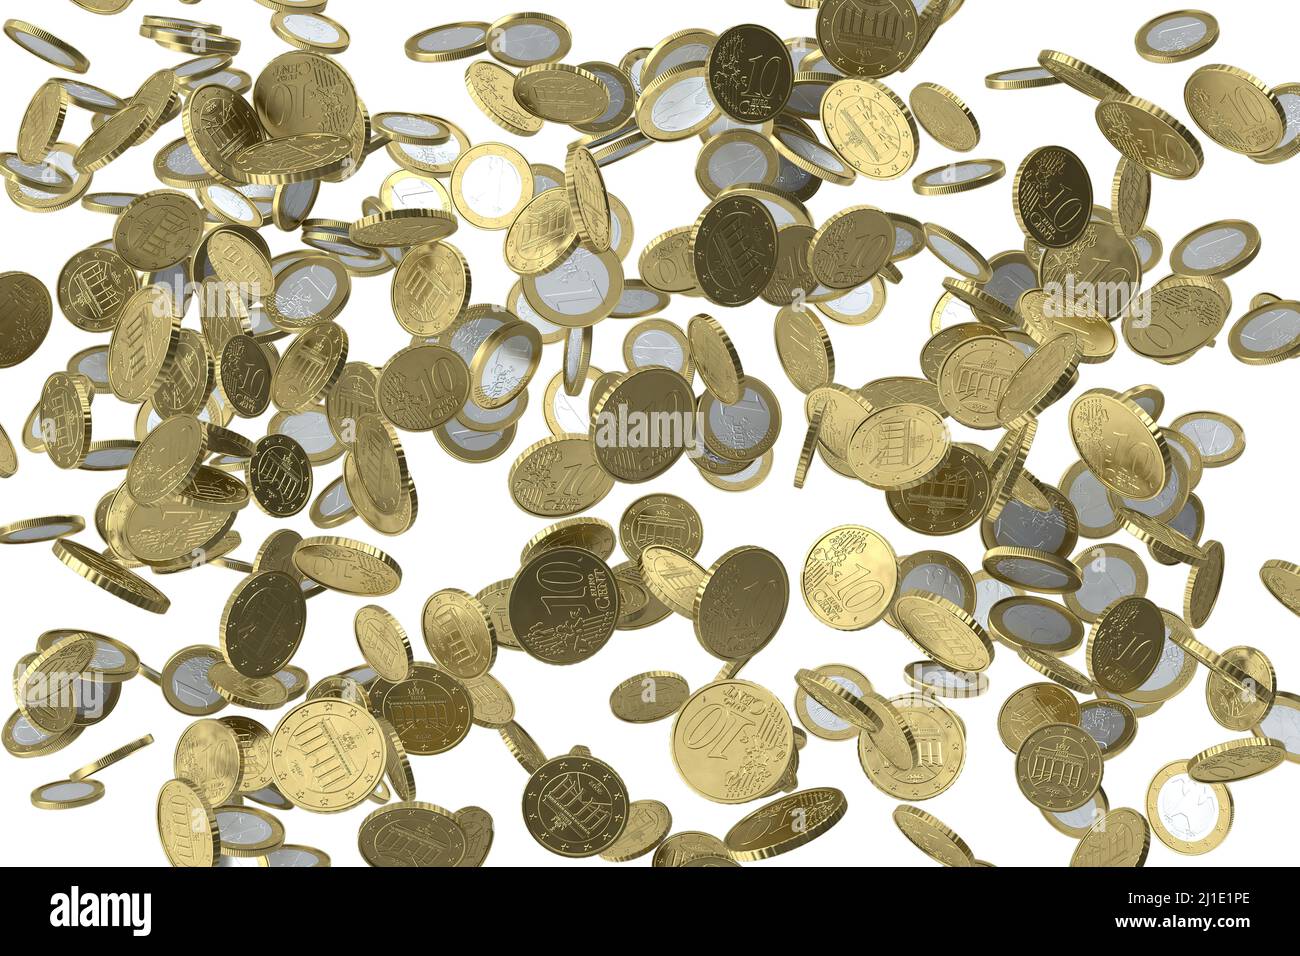 Concept idea of lots falling/dropping euro coins, to represent a poor European economy or devaluation of European money that could cause a depression. Stock Photo